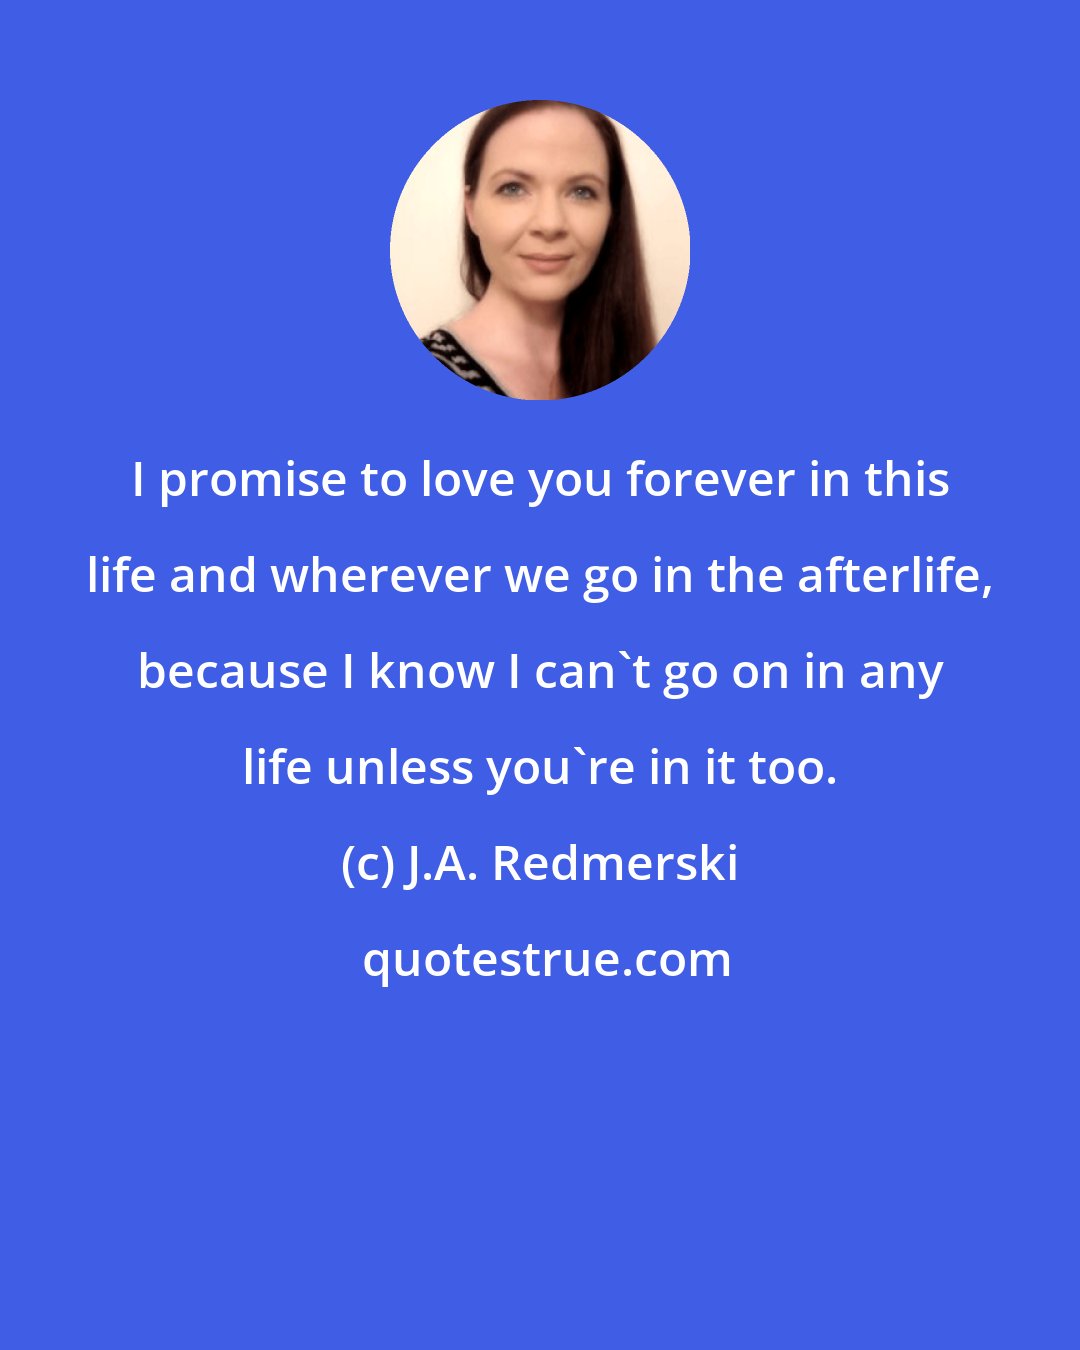 J.A. Redmerski: I promise to love you forever in this life and wherever we go in the afterlife, because I know I can't go on in any life unless you're in it too.